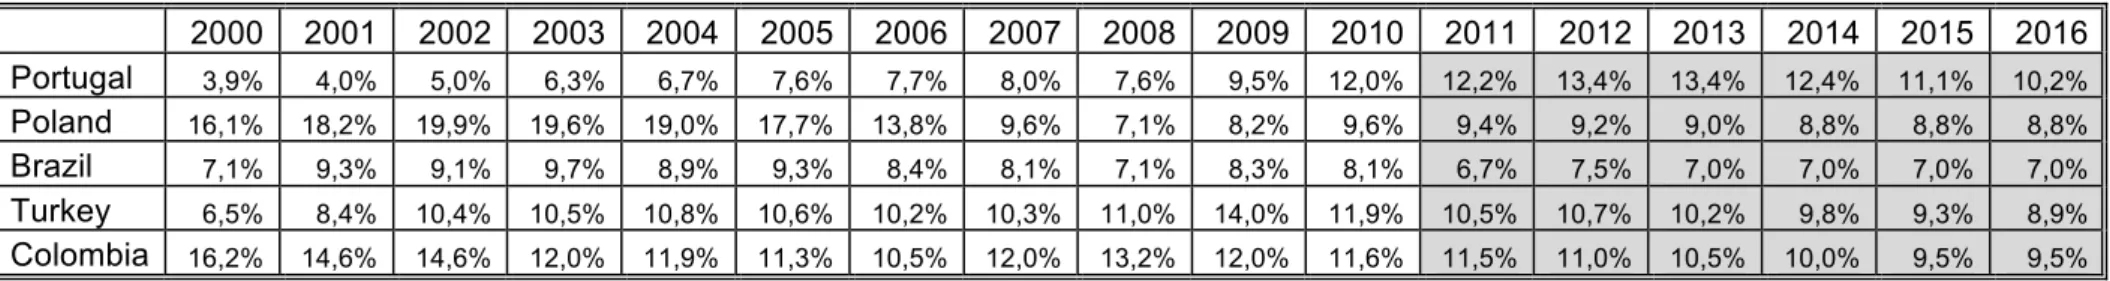 Table 2.5- Unemployment, total (% of total labour force) (estimative starts in 2011)  2000  2001  2002  2003  2004  2005  2006  2007  2008  2009  2010  2011  2012  2013  2014  2015  2016  Portugal  3,9%  4,0%  5,0%  6,3%  6,7%  7,6%  7,7%  8,0%  7,6%  9,5%